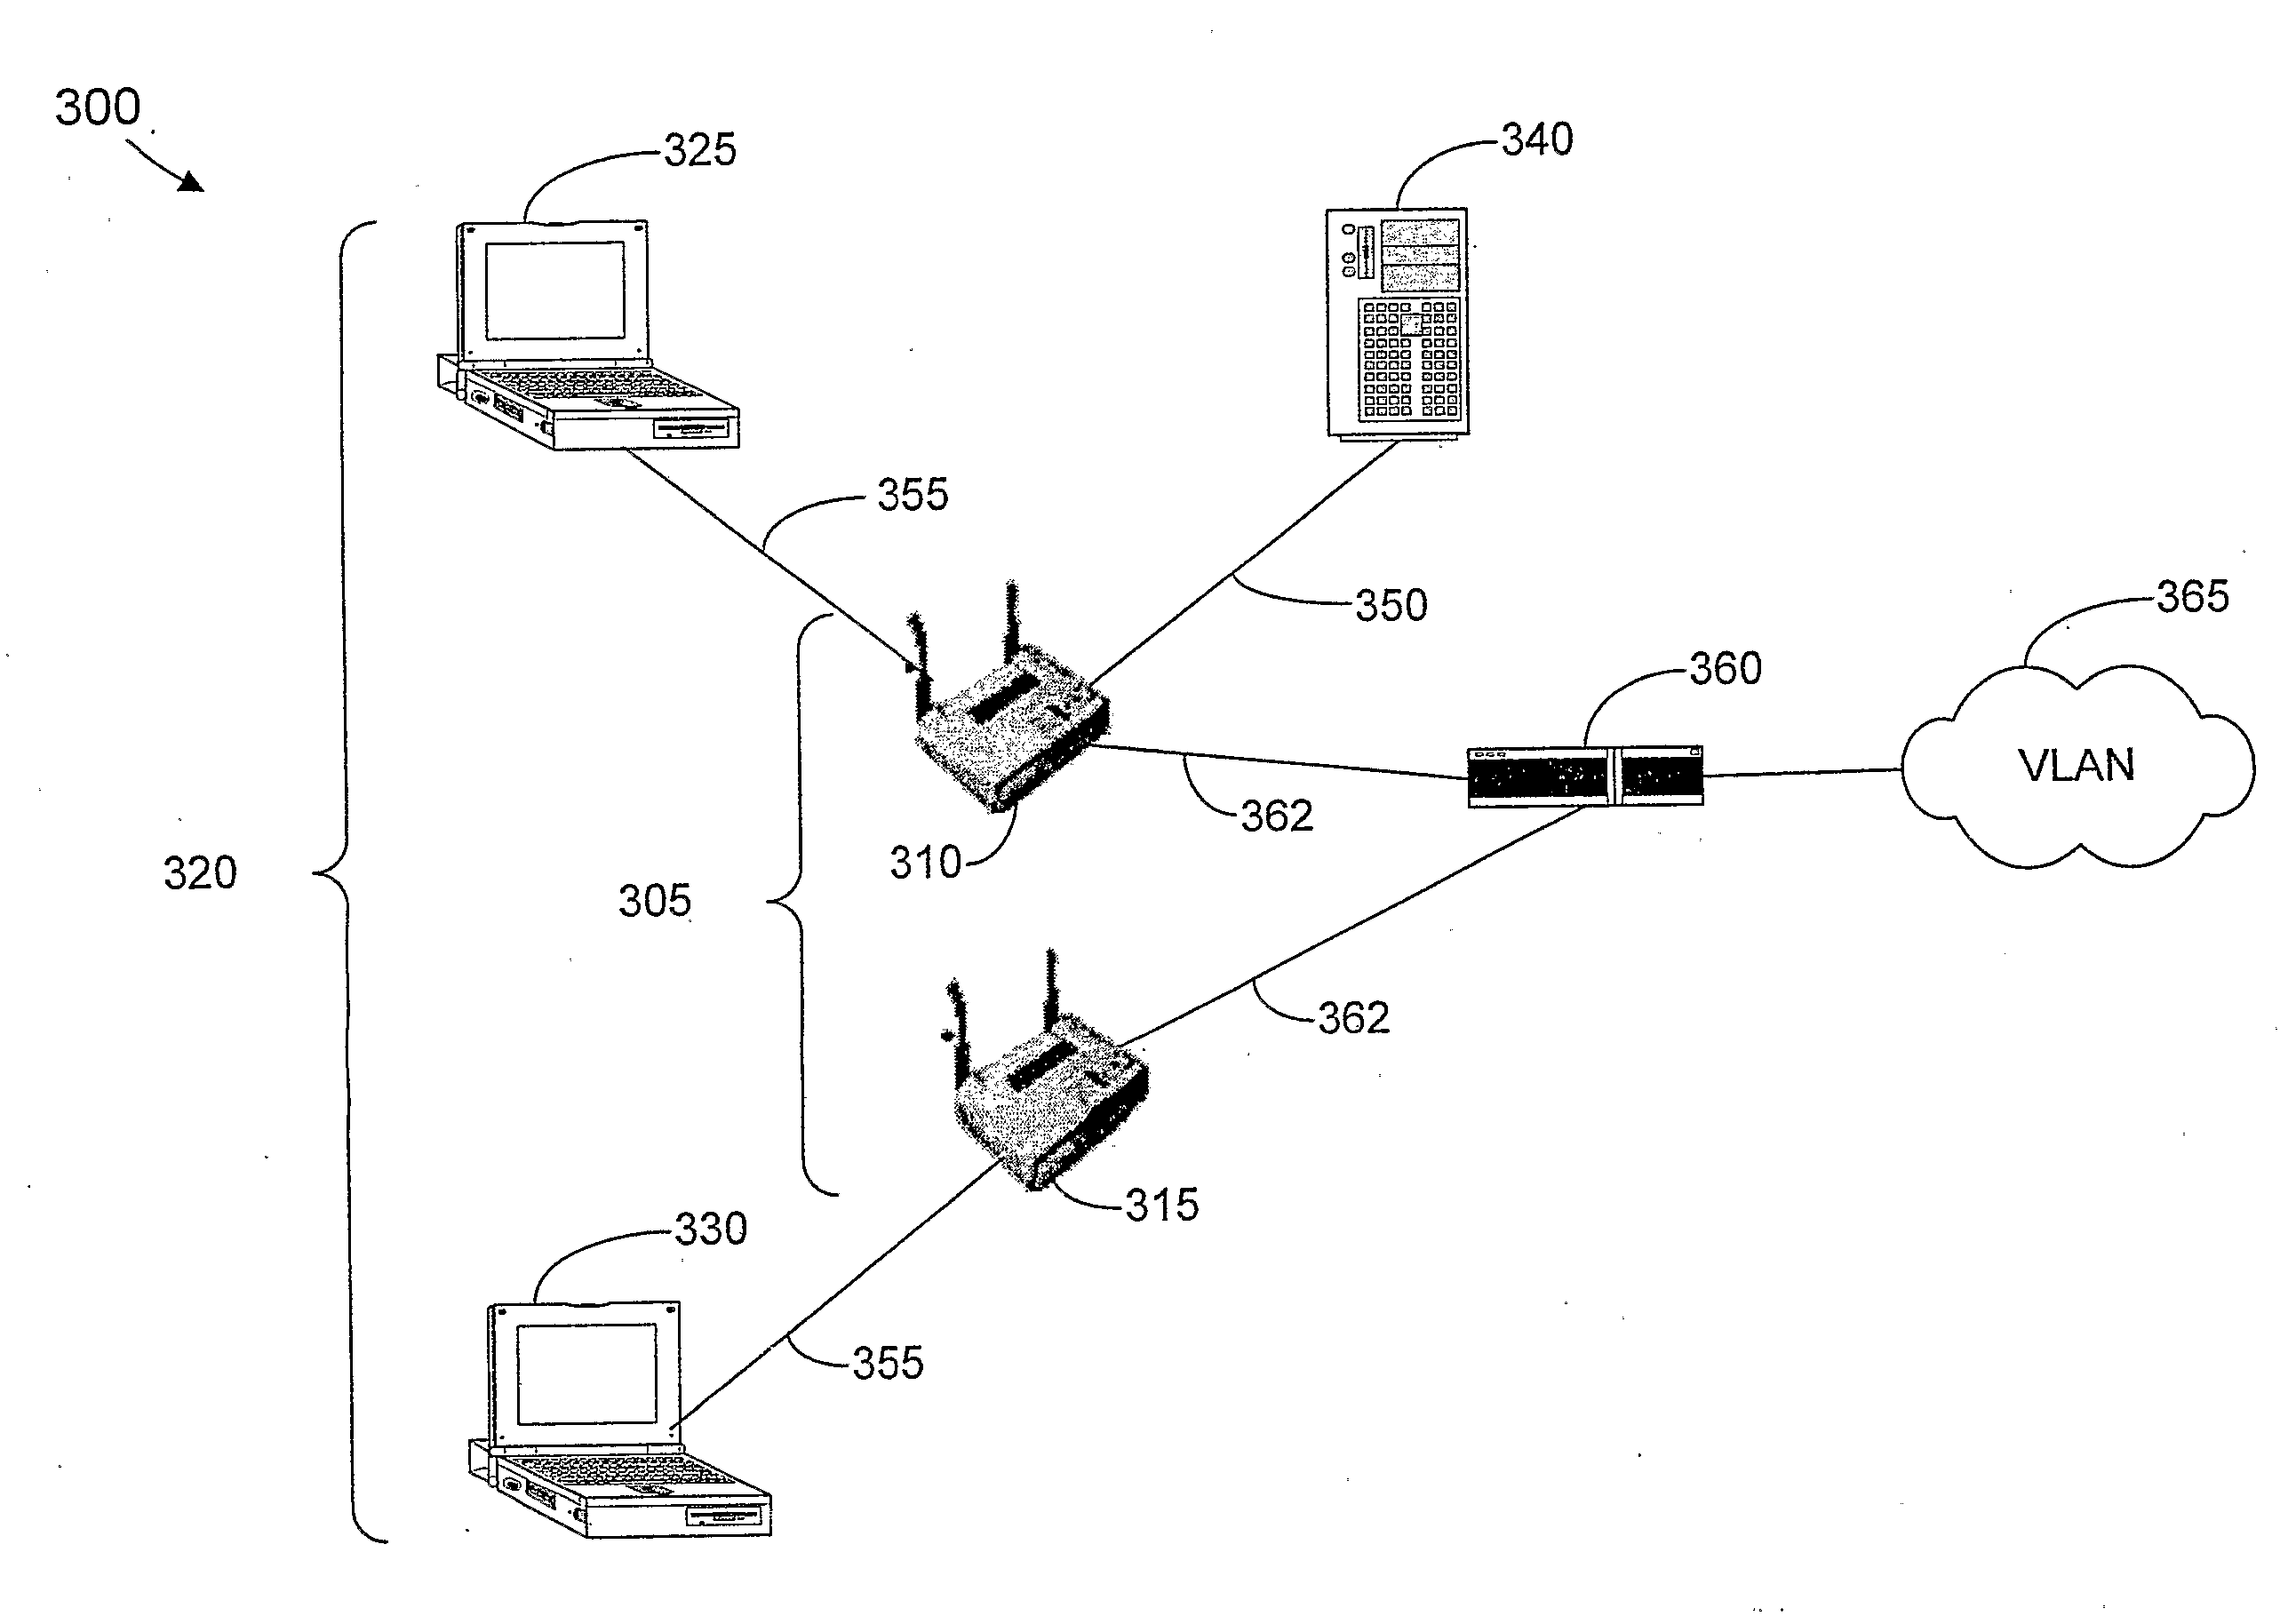 Method And Apparatus For Providing Quality Of Service To Voip Over 802.11 Wireless Lans